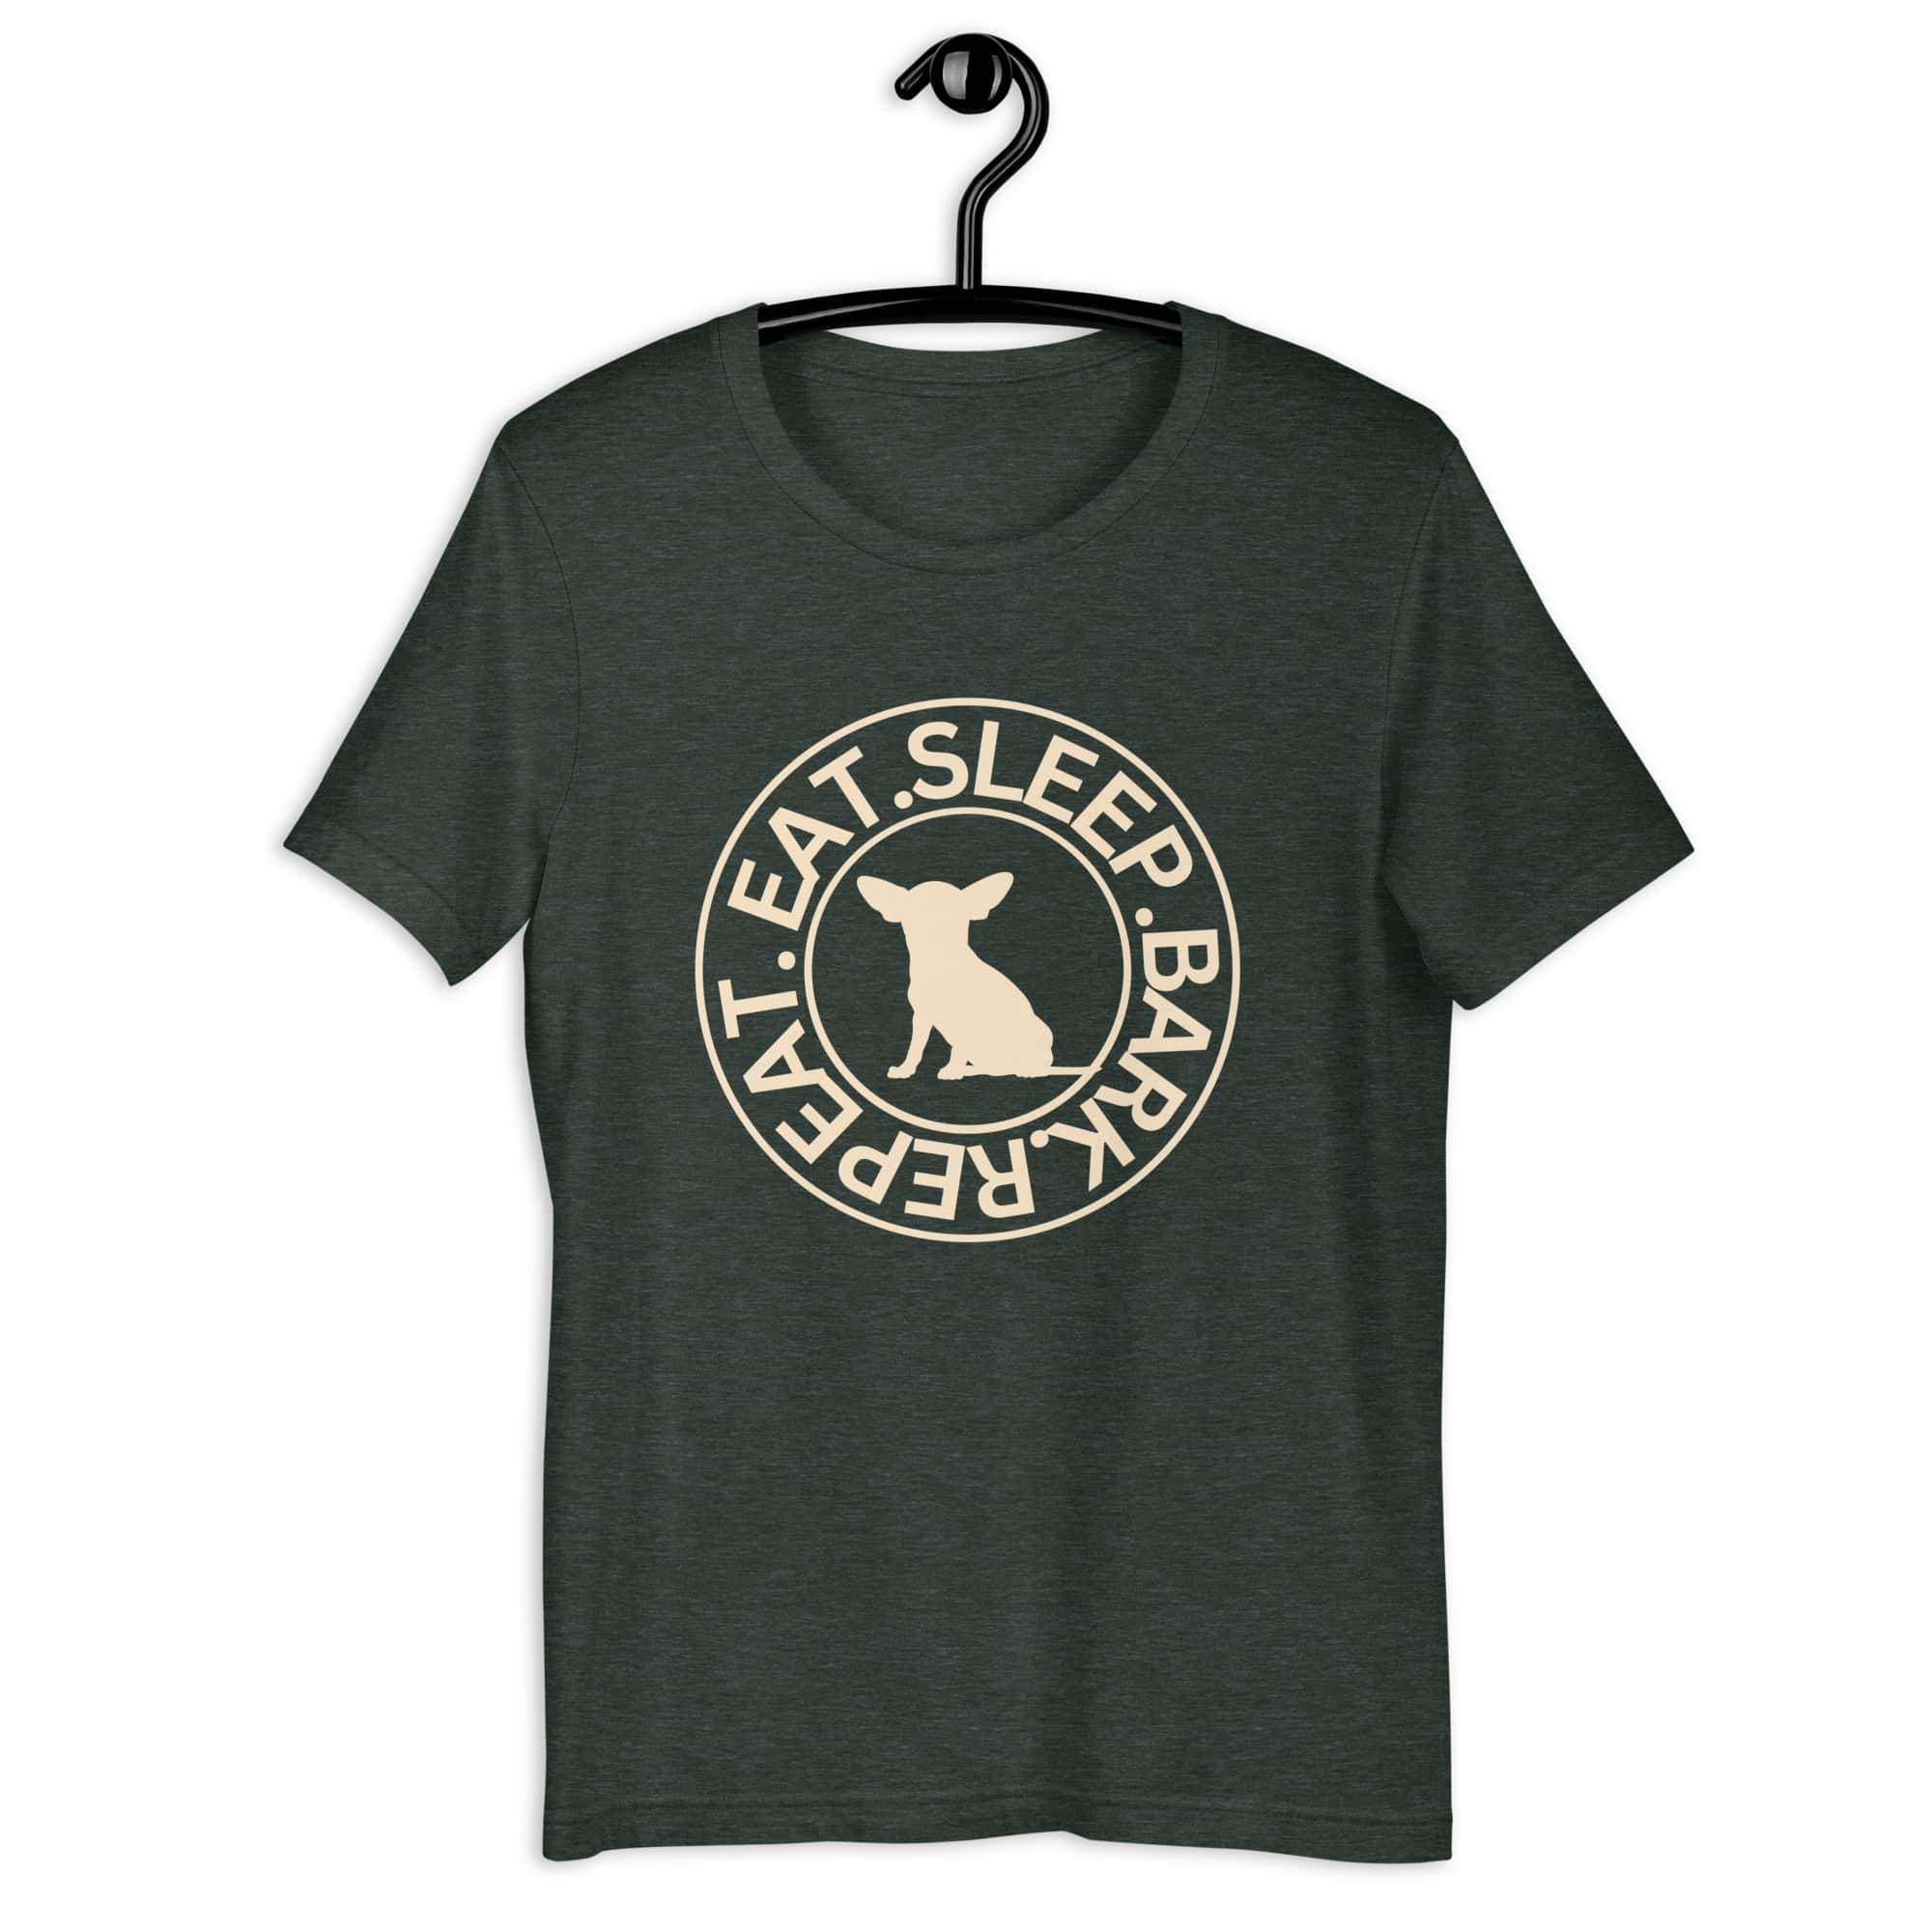 Eat Sleep Bark Repeat Chihuahua Unisex T-Shirt. Heather Forest